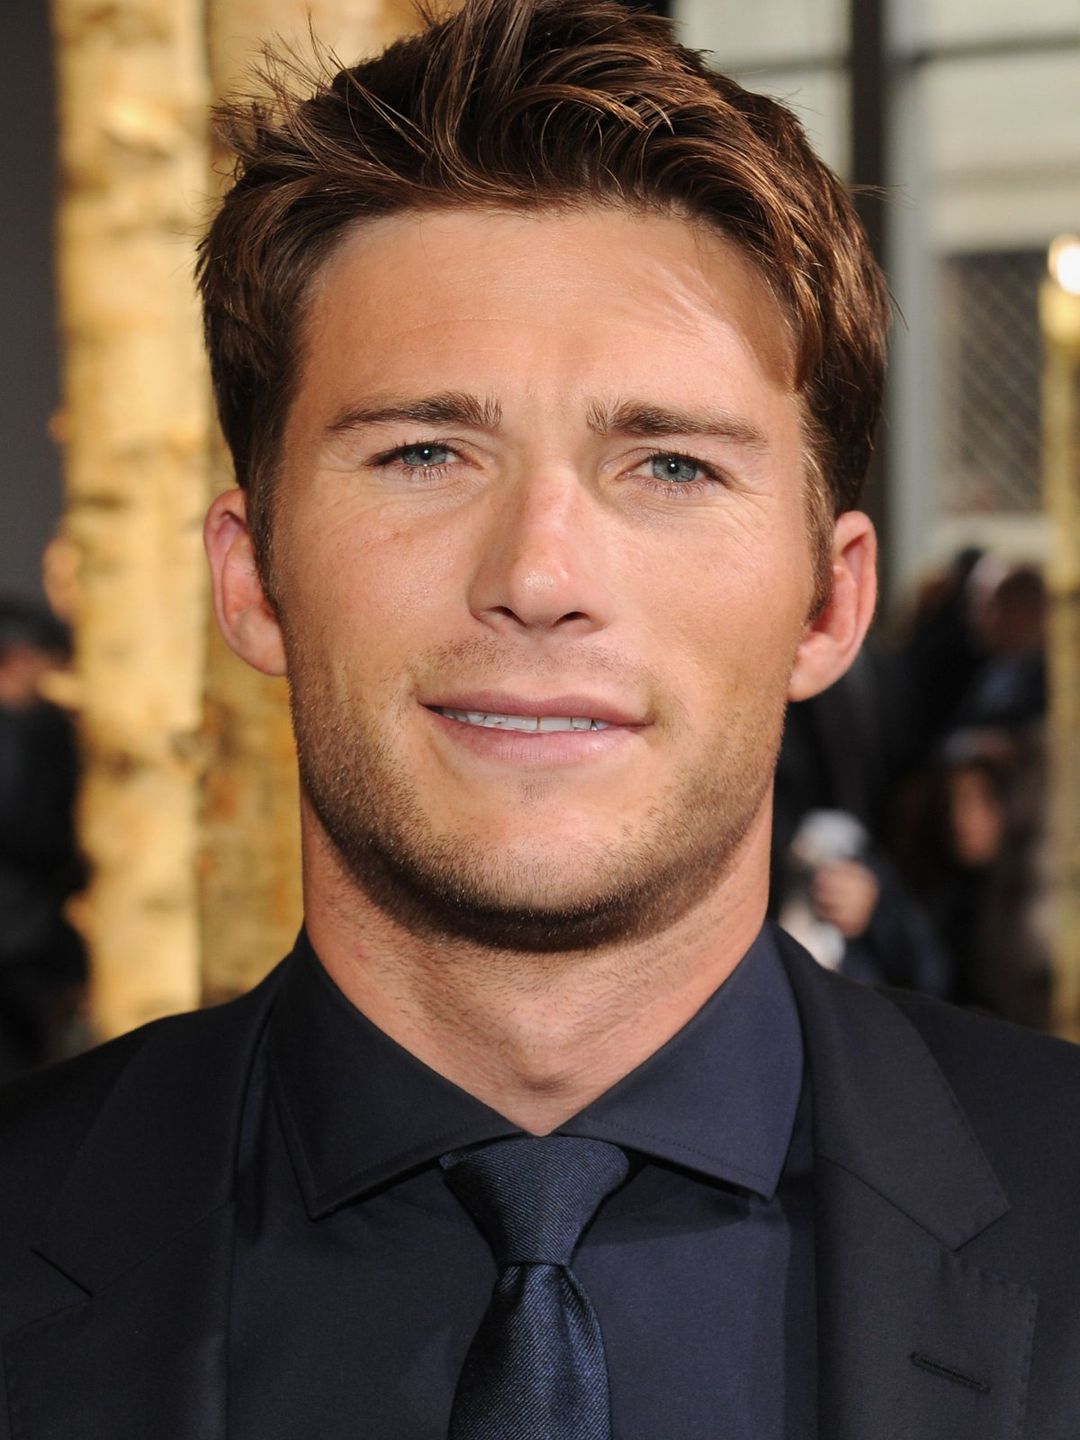 Scott Eastwood in real life